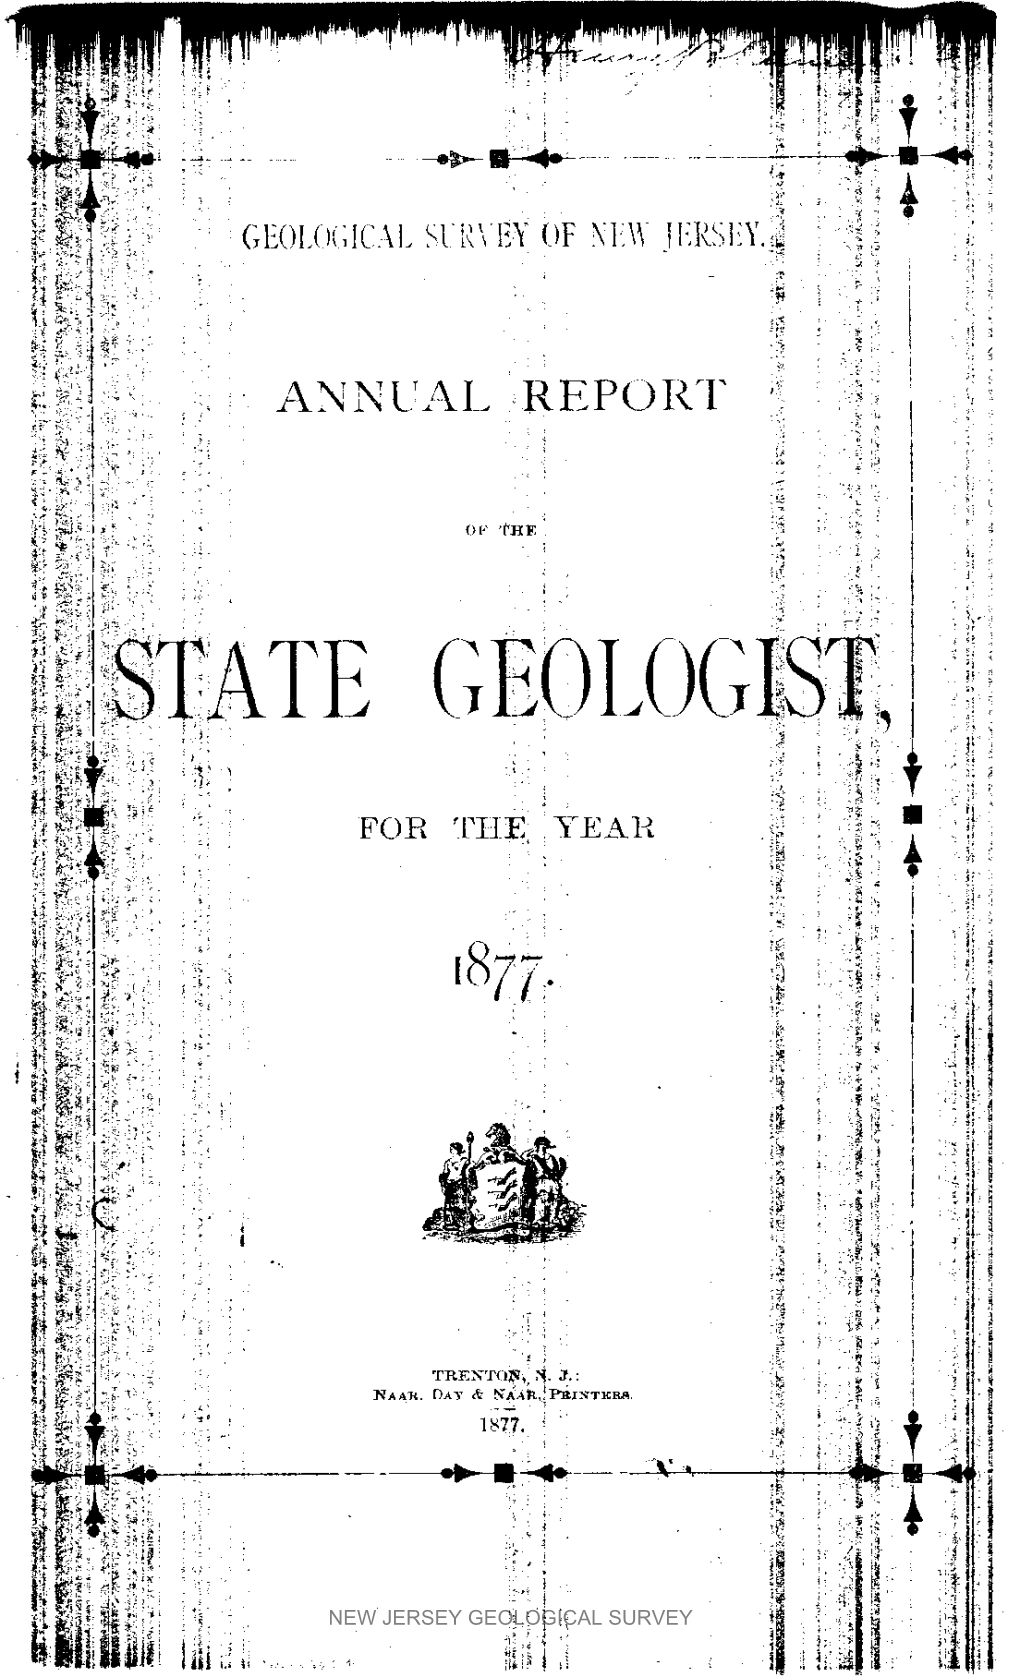 Annual Report of the State Geologist for the Year 1877